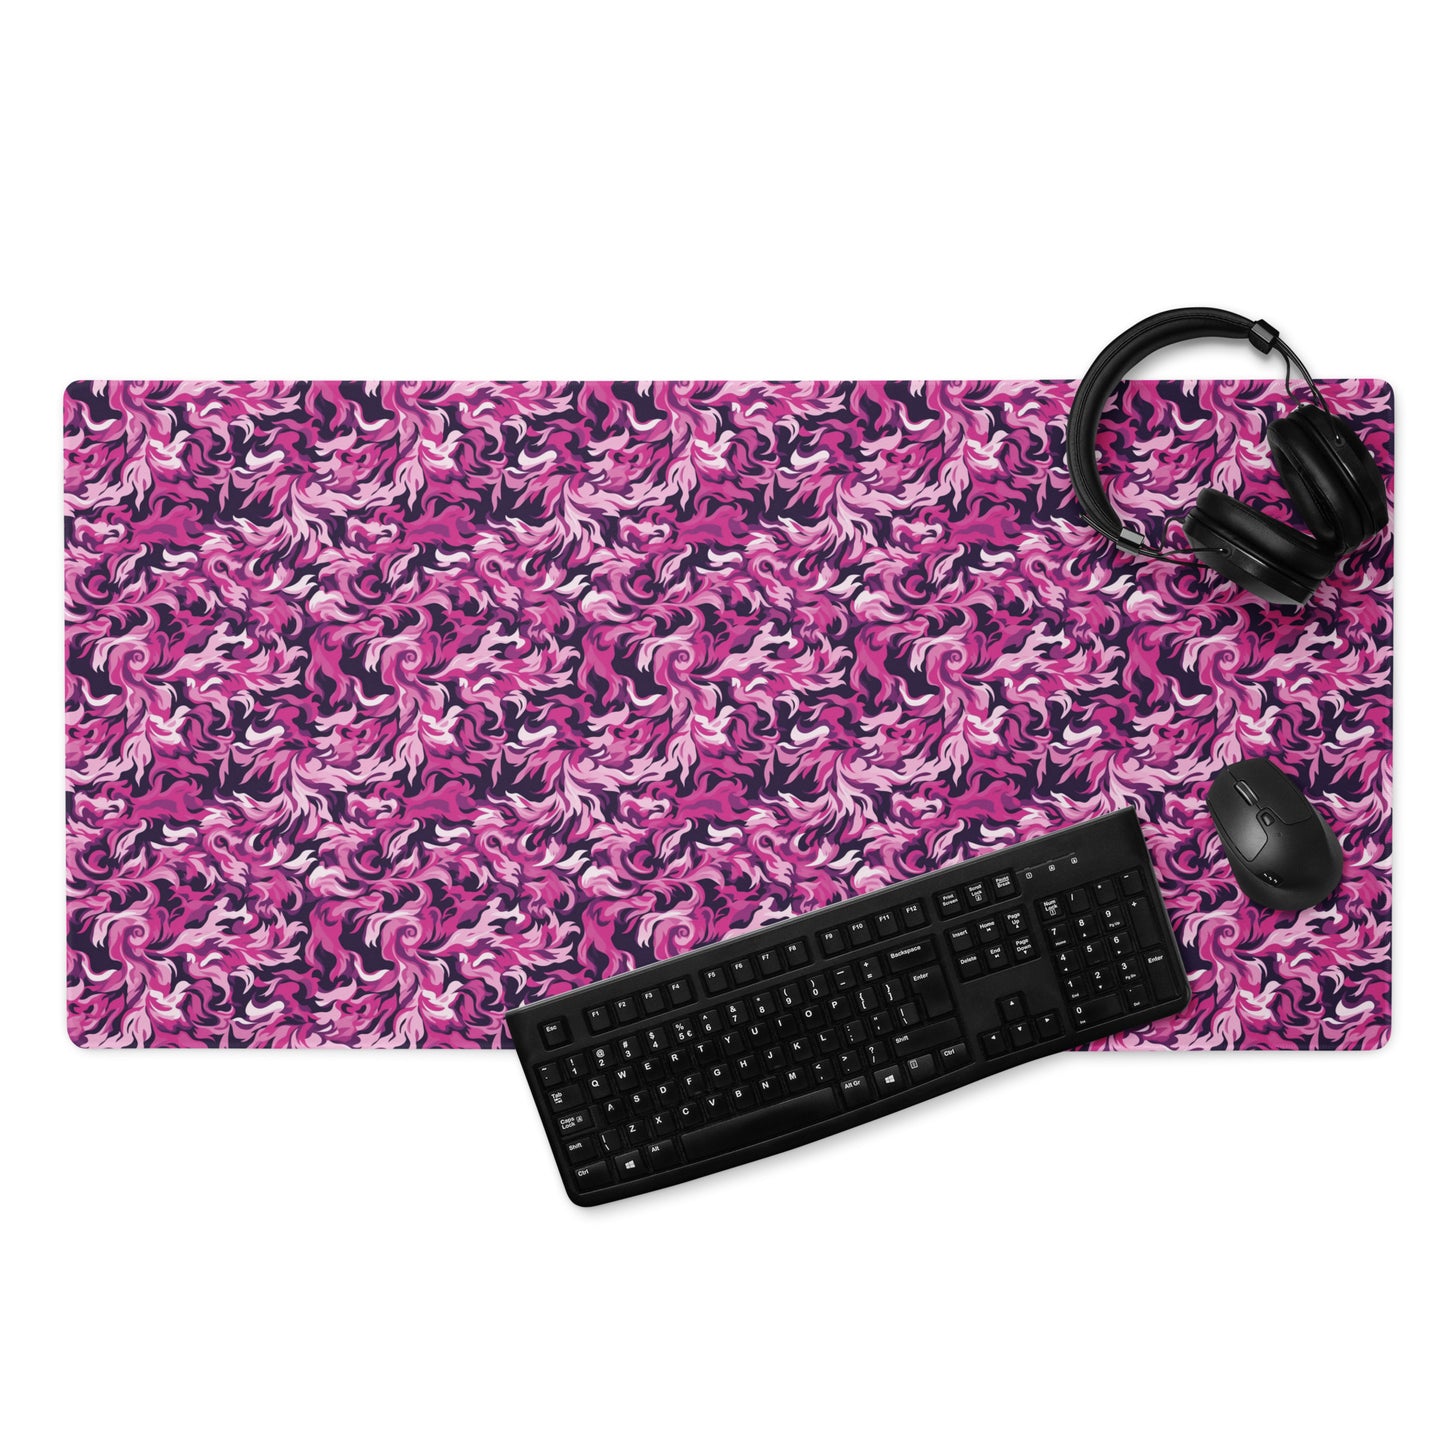 A 36" x 18" desk pad with a pink and magenta camo pattern. With a keyboard, mouse, and headphones sitting on it.